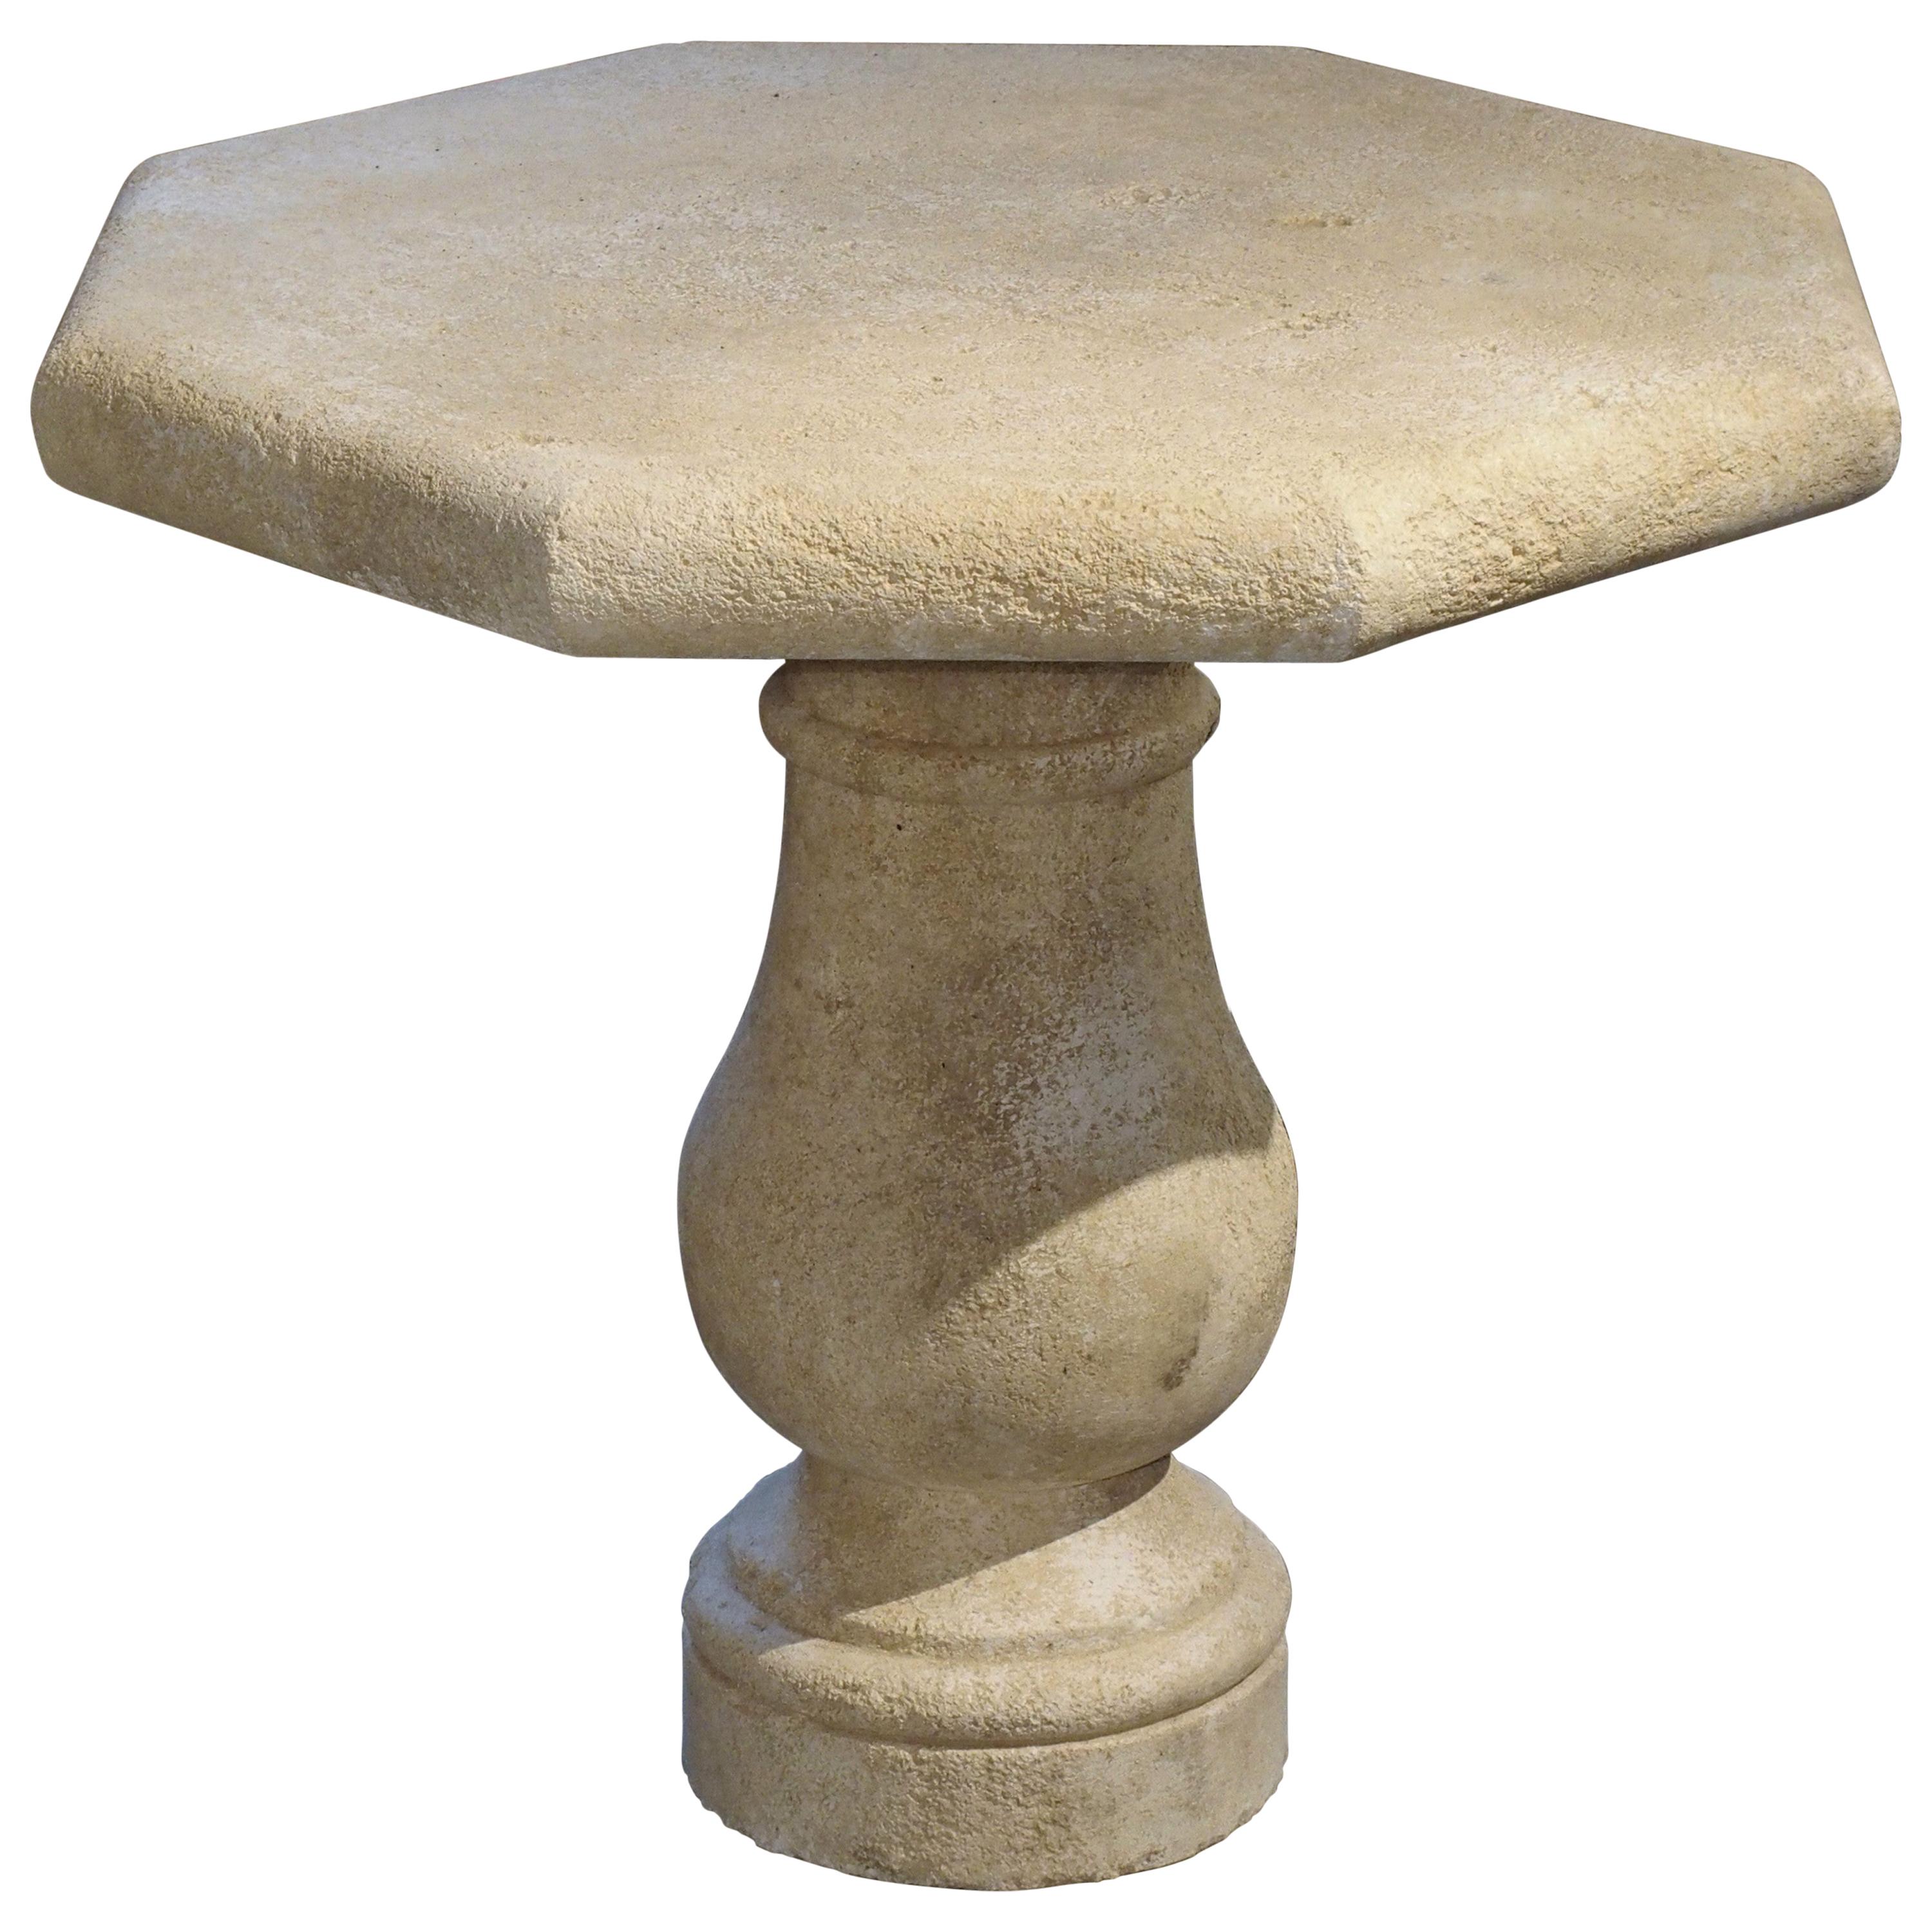 Carved Octagonal Stone Side Table from Provence, France